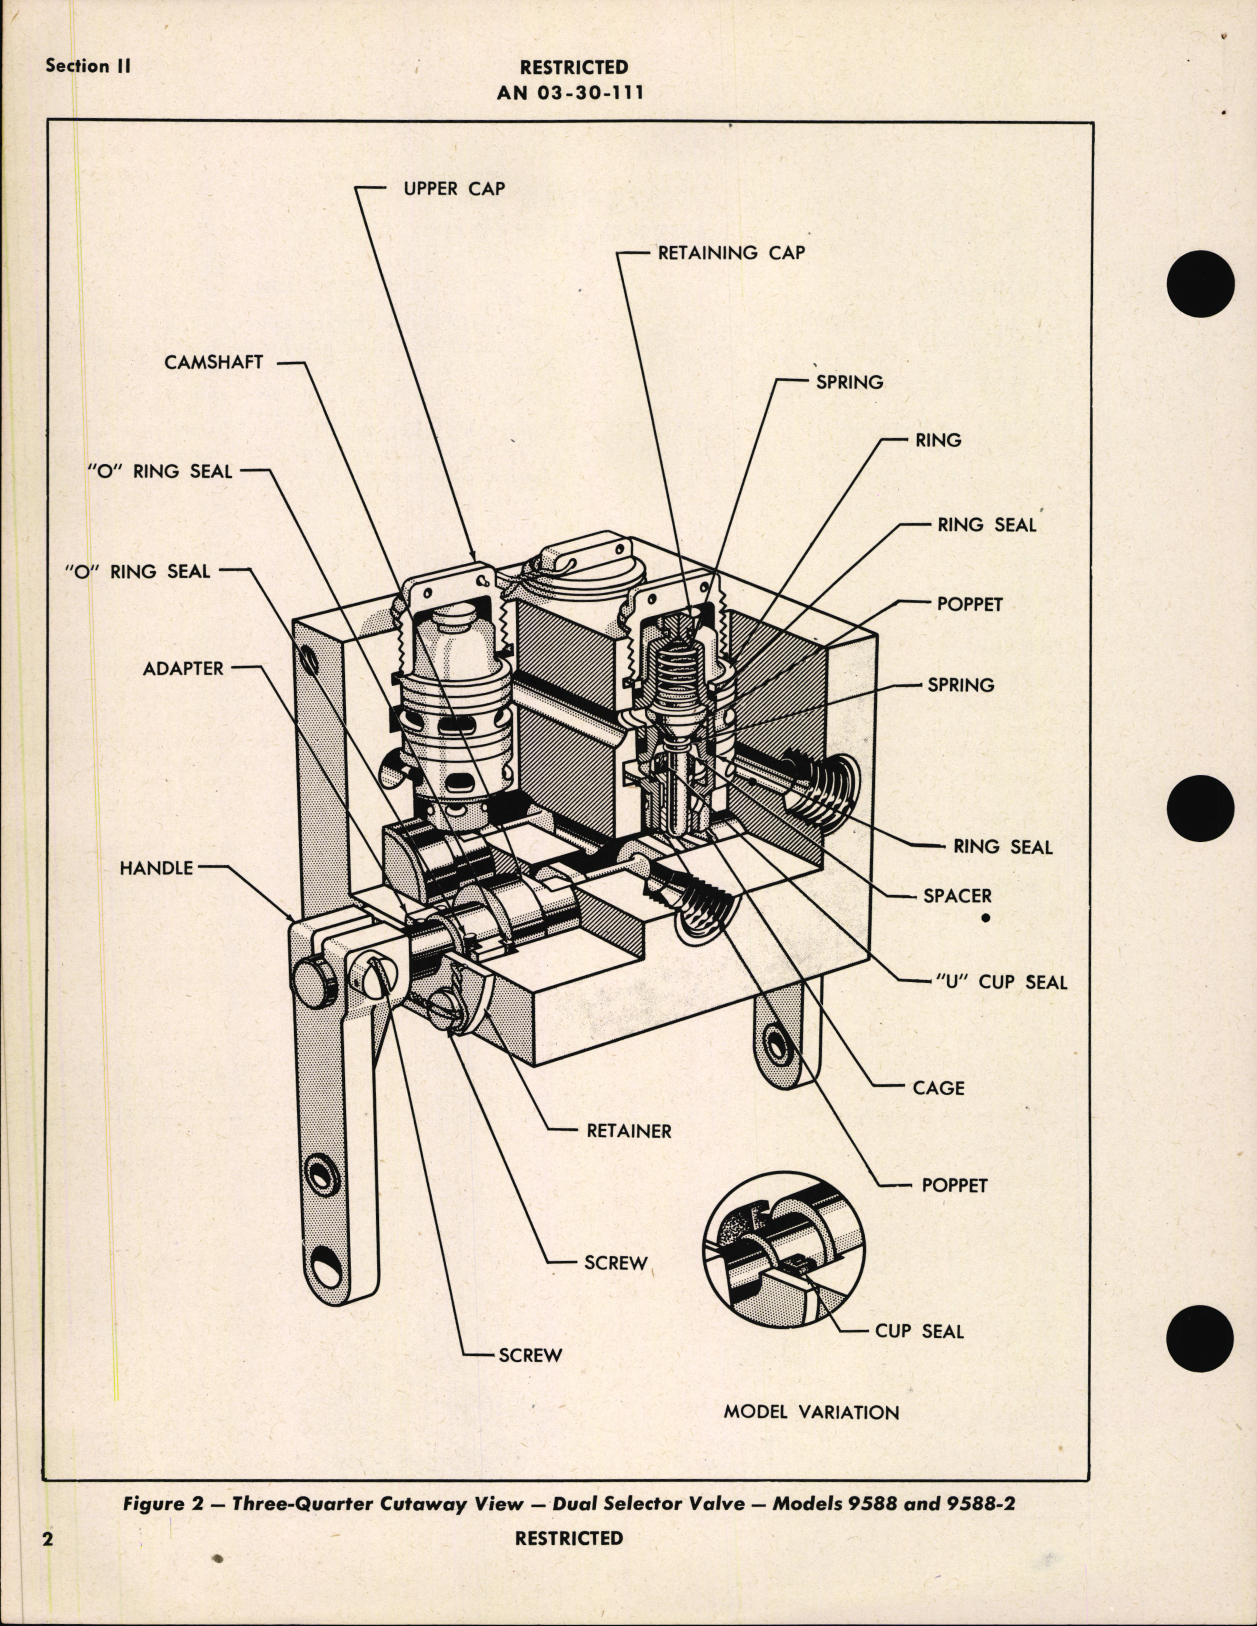 Sample page 6 from AirCorps Library document: Handbook of Instructions with Parts Catalog for Steel Seat Hydraulic Selector Valves